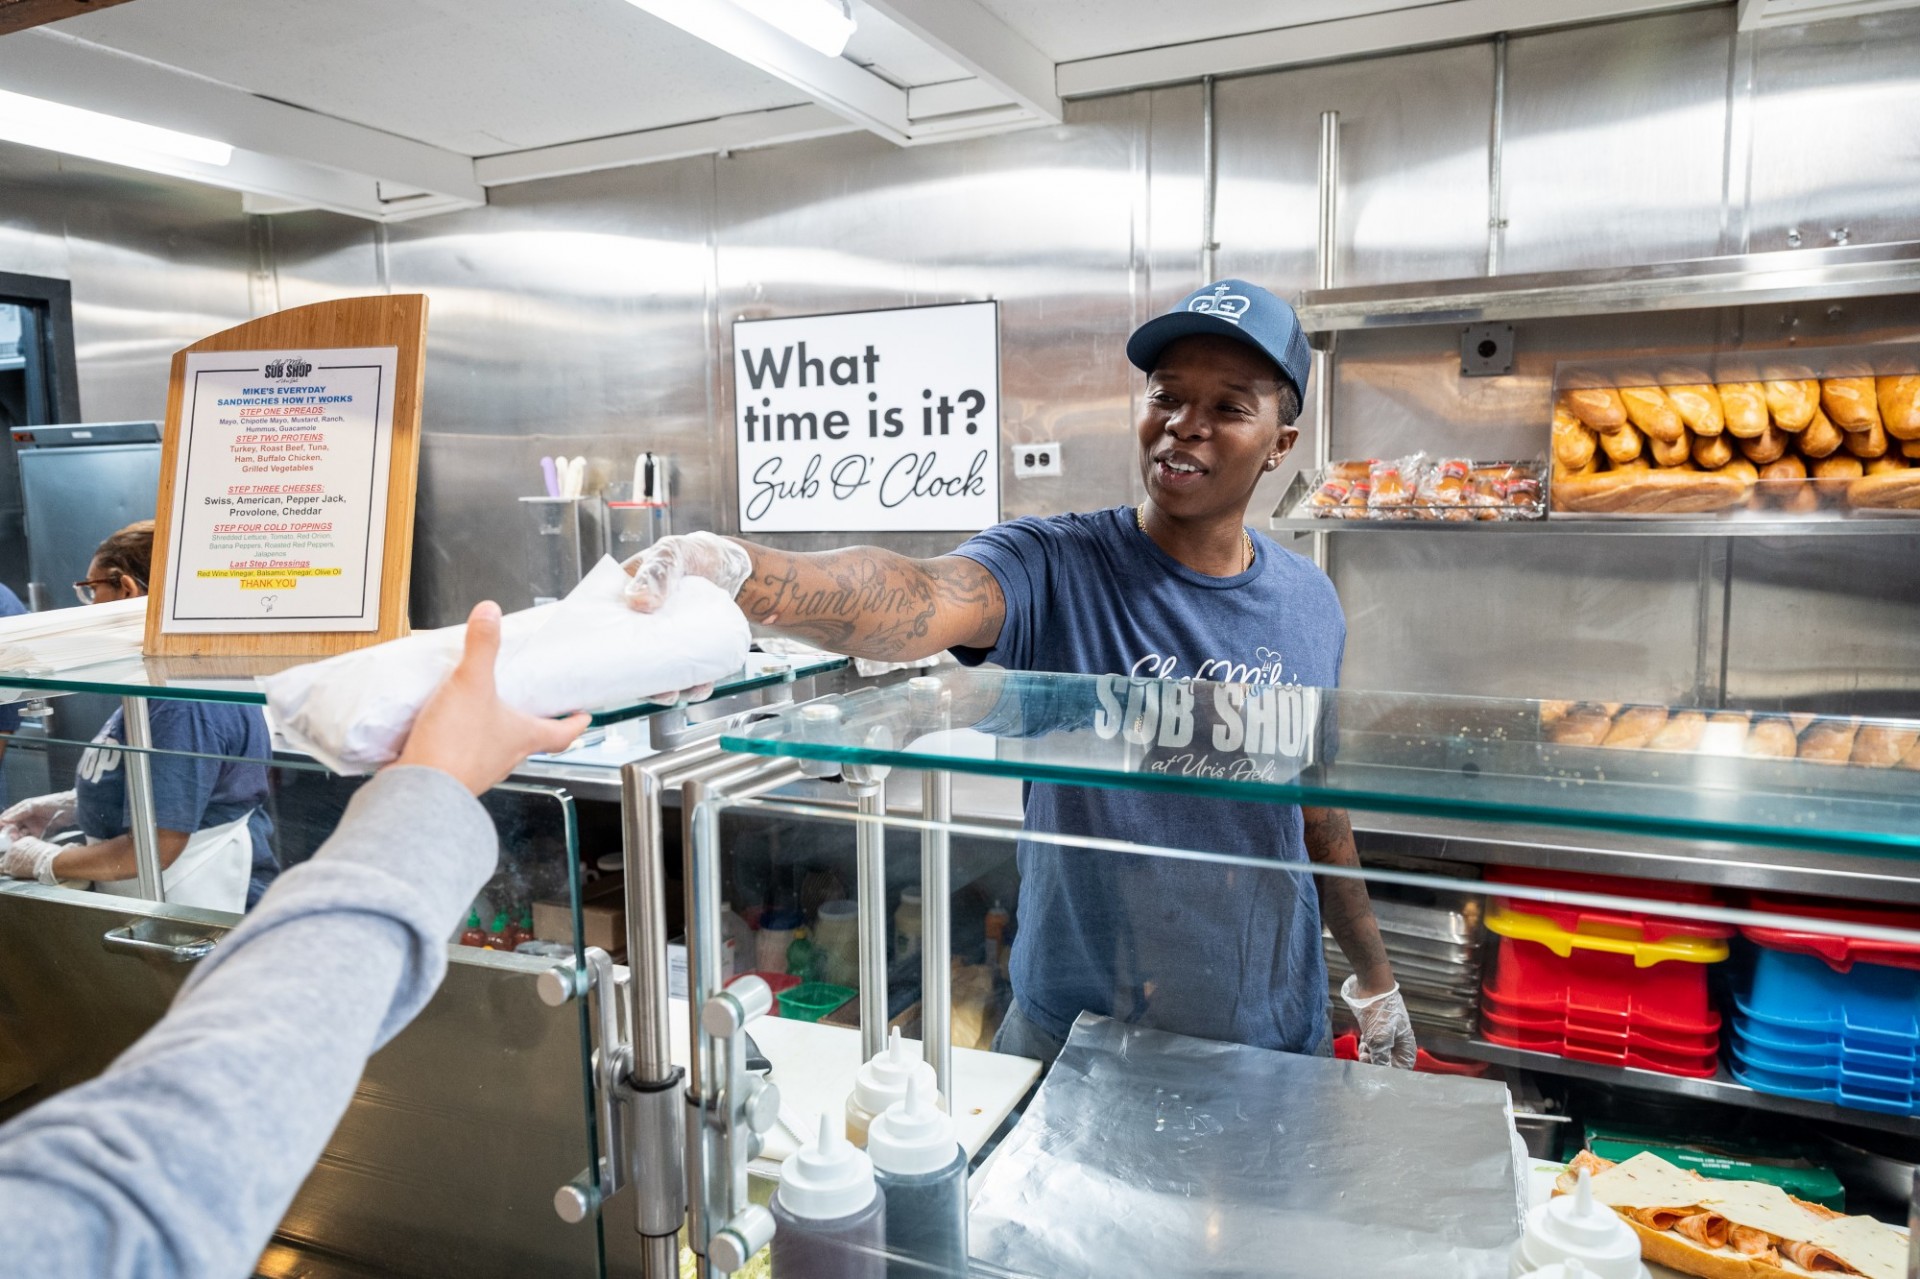 Chef Mike's Sub Shop employee handing a sandwich to a student